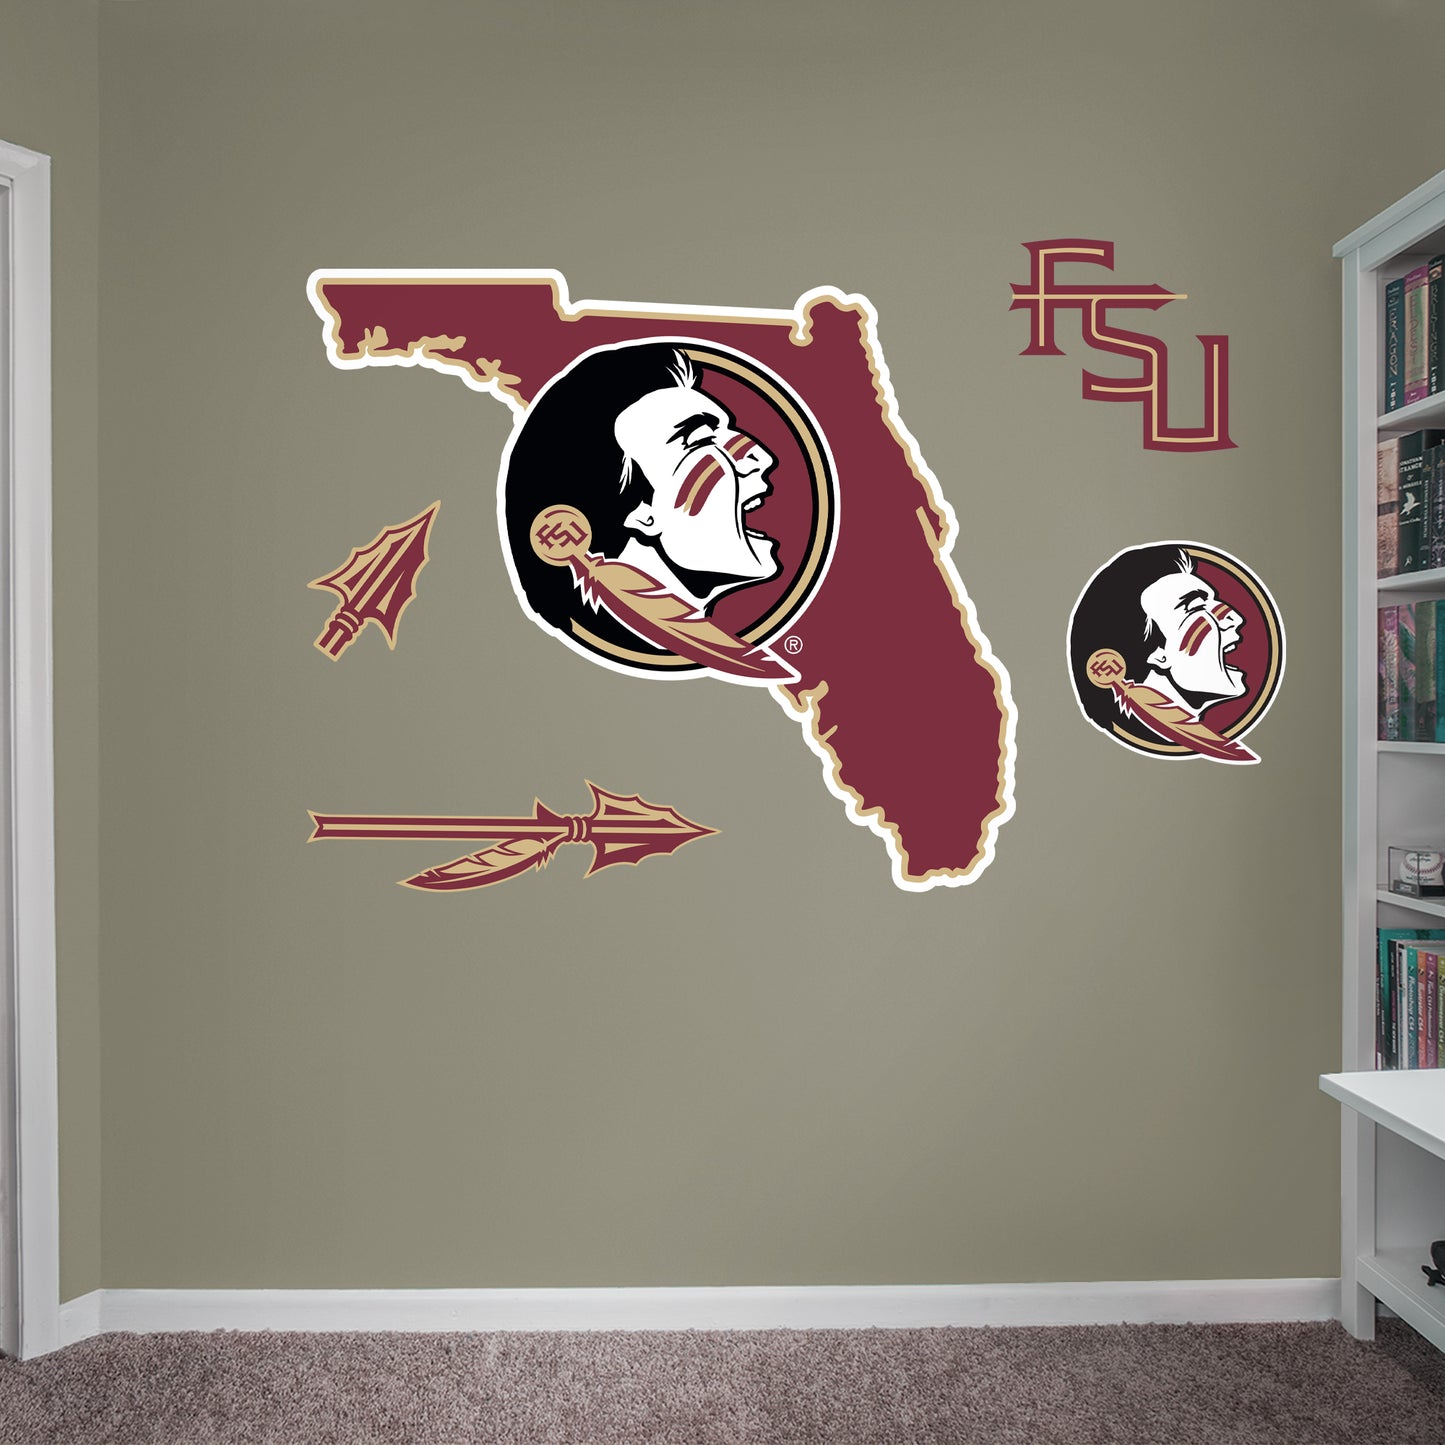 Florida State Seminoles: State of Florida Logo - Officially Licensed NCAA Removable Adhesive Decal